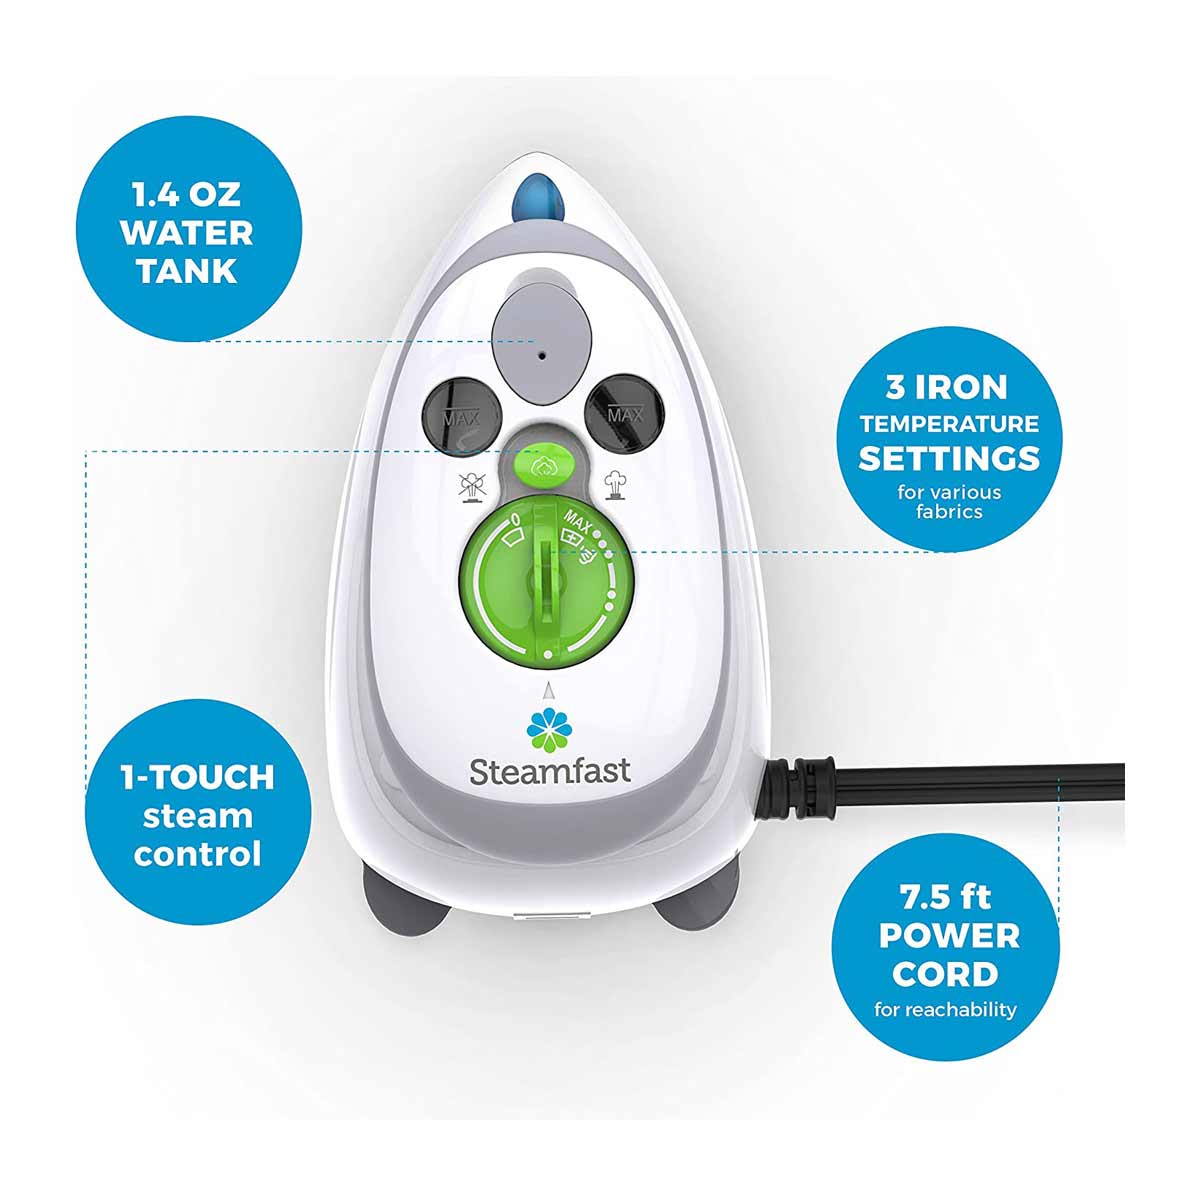 https://www.moores-sew.com/wp-content/uploads/2021/12/Steamfast_miniIron_features.jpg